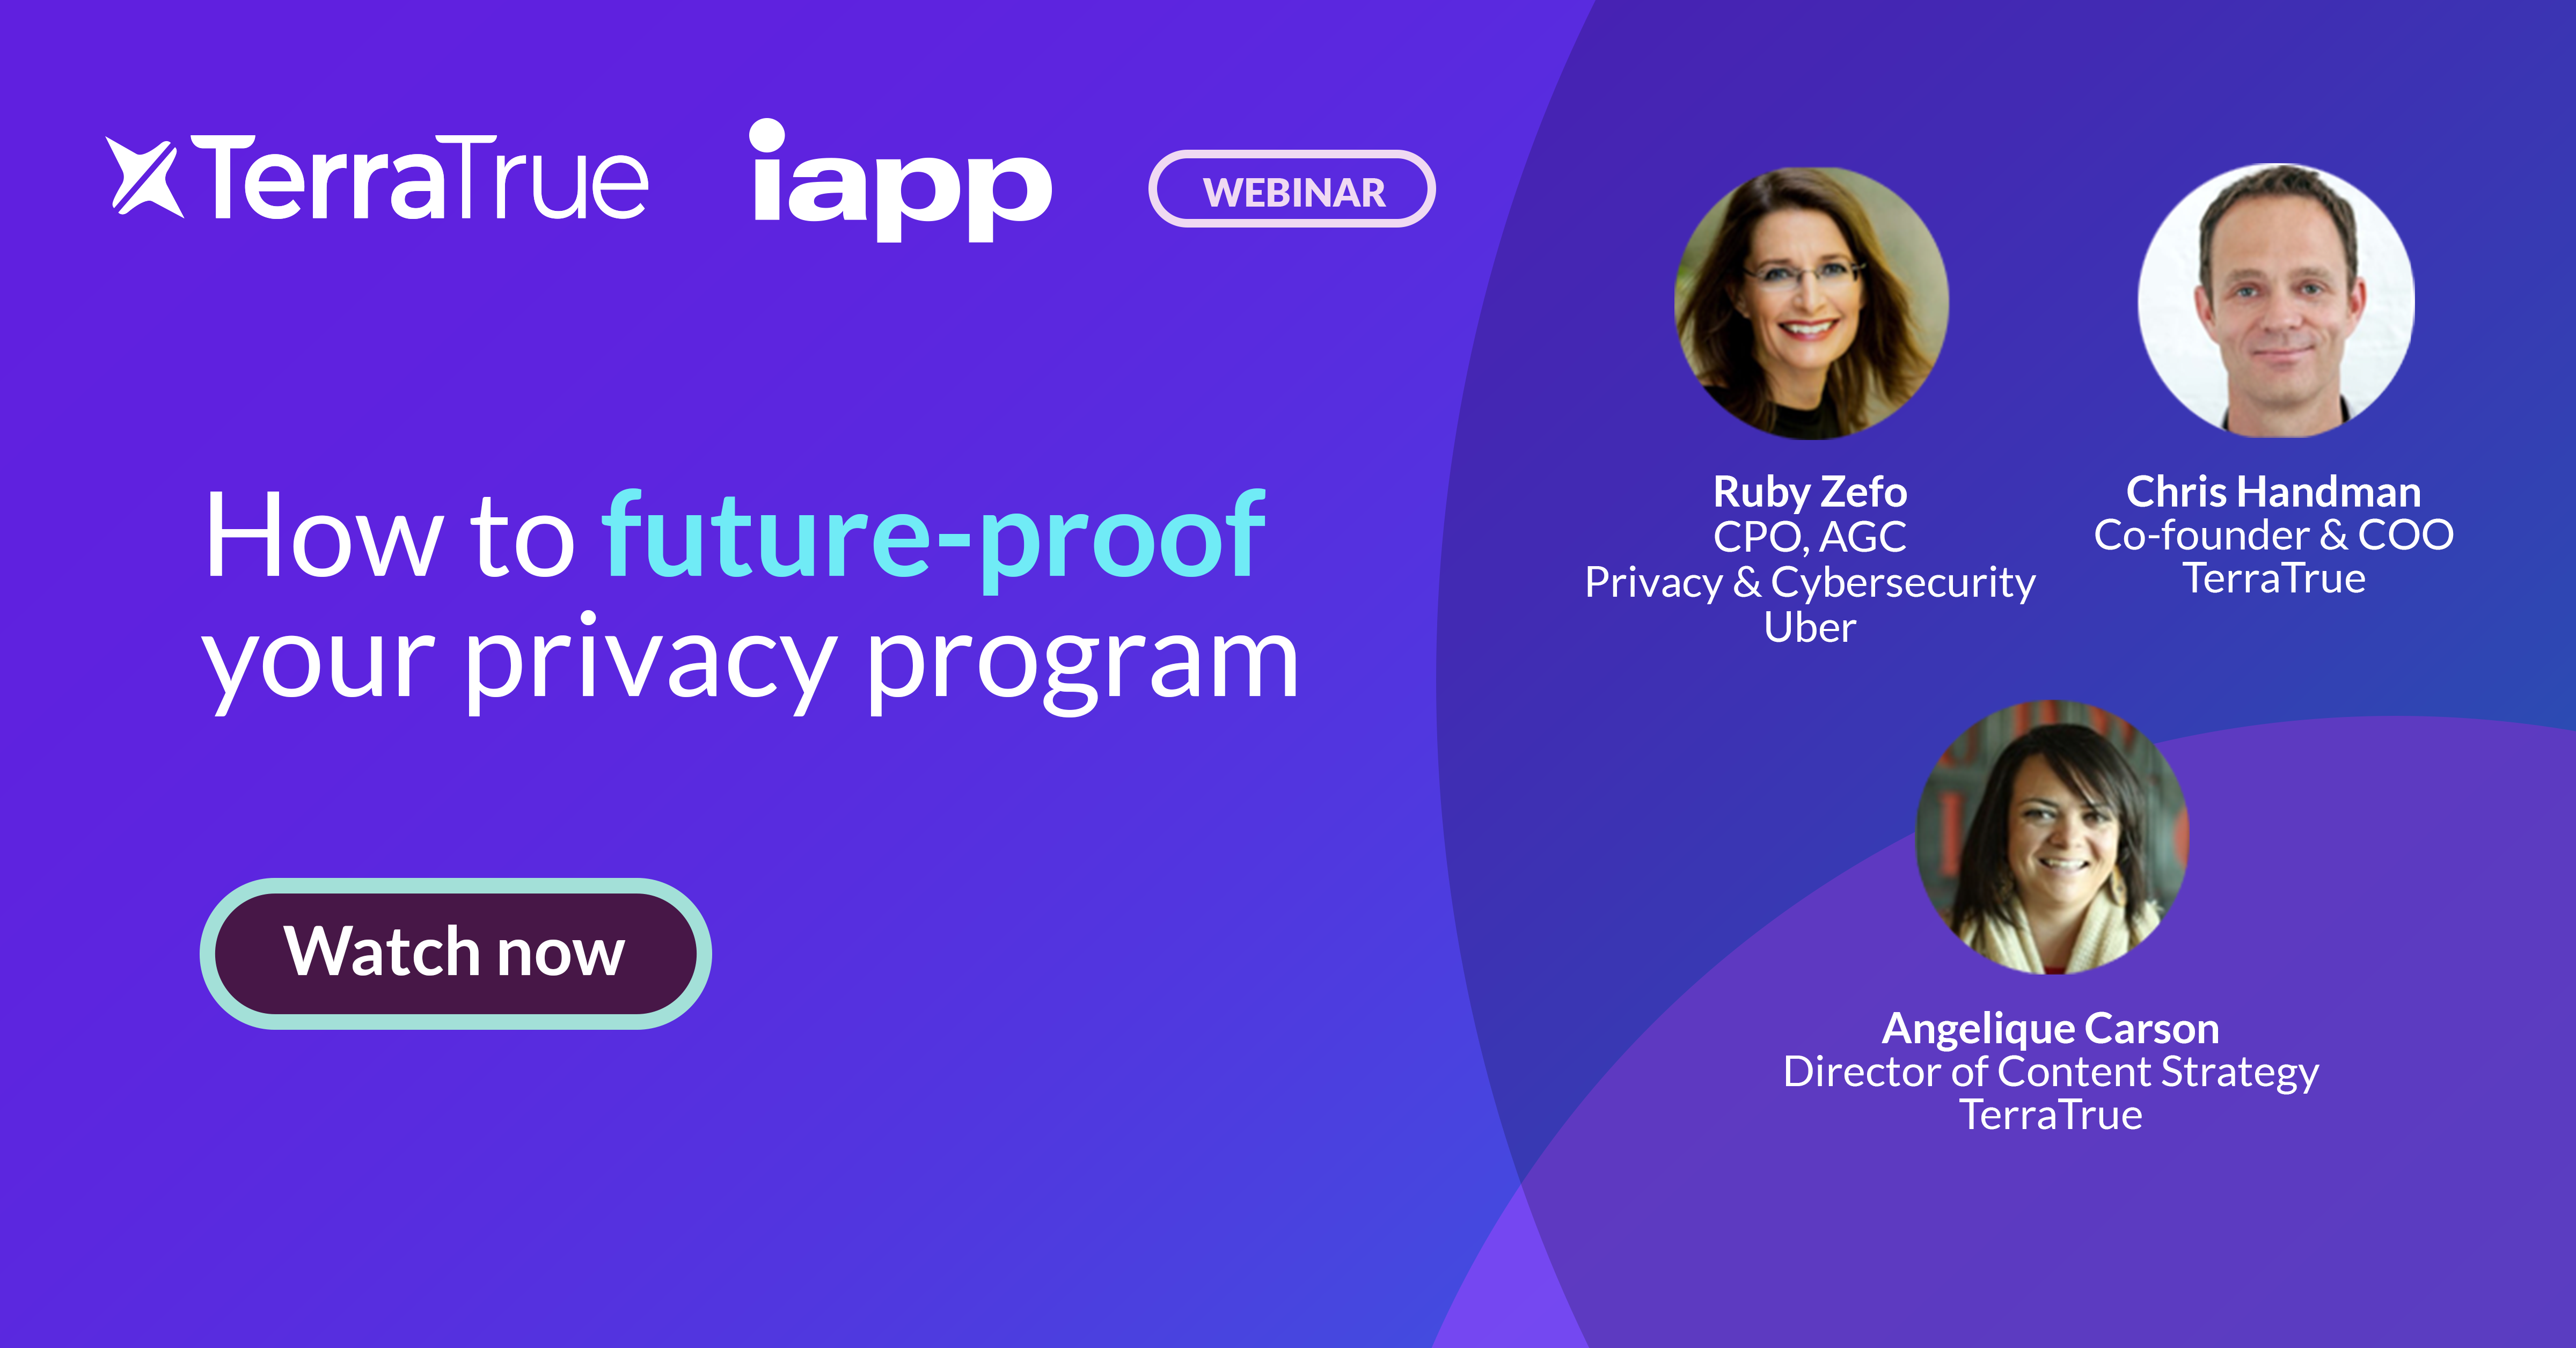 How to future proof your privacy program